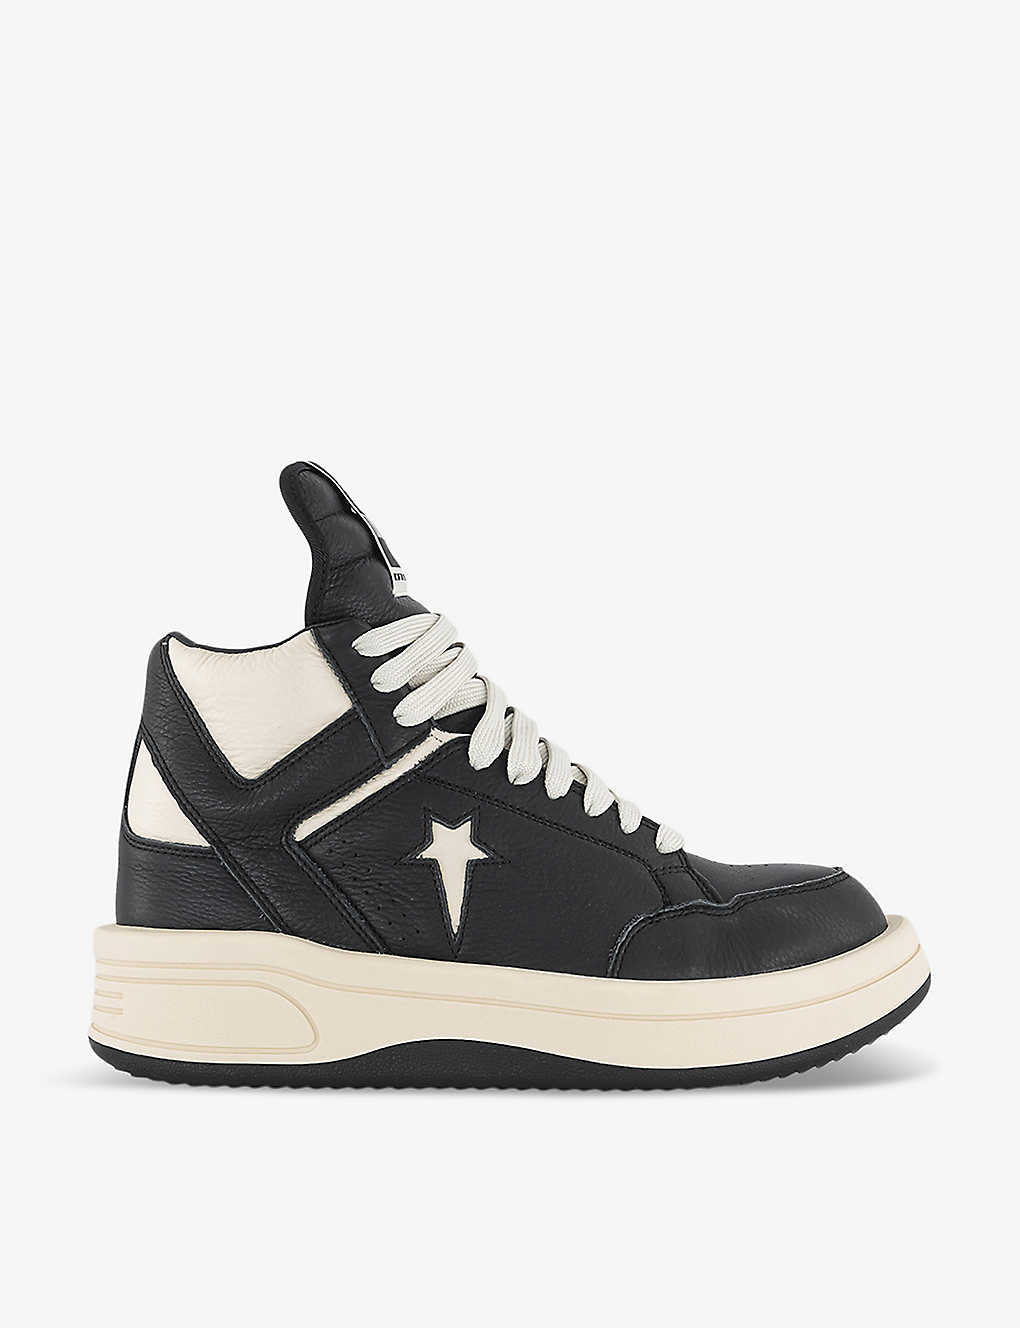 Ricky Owens Mens Black Natural Black Rick Owens X Converse Turbowpn Branded Leather High-top Trainer